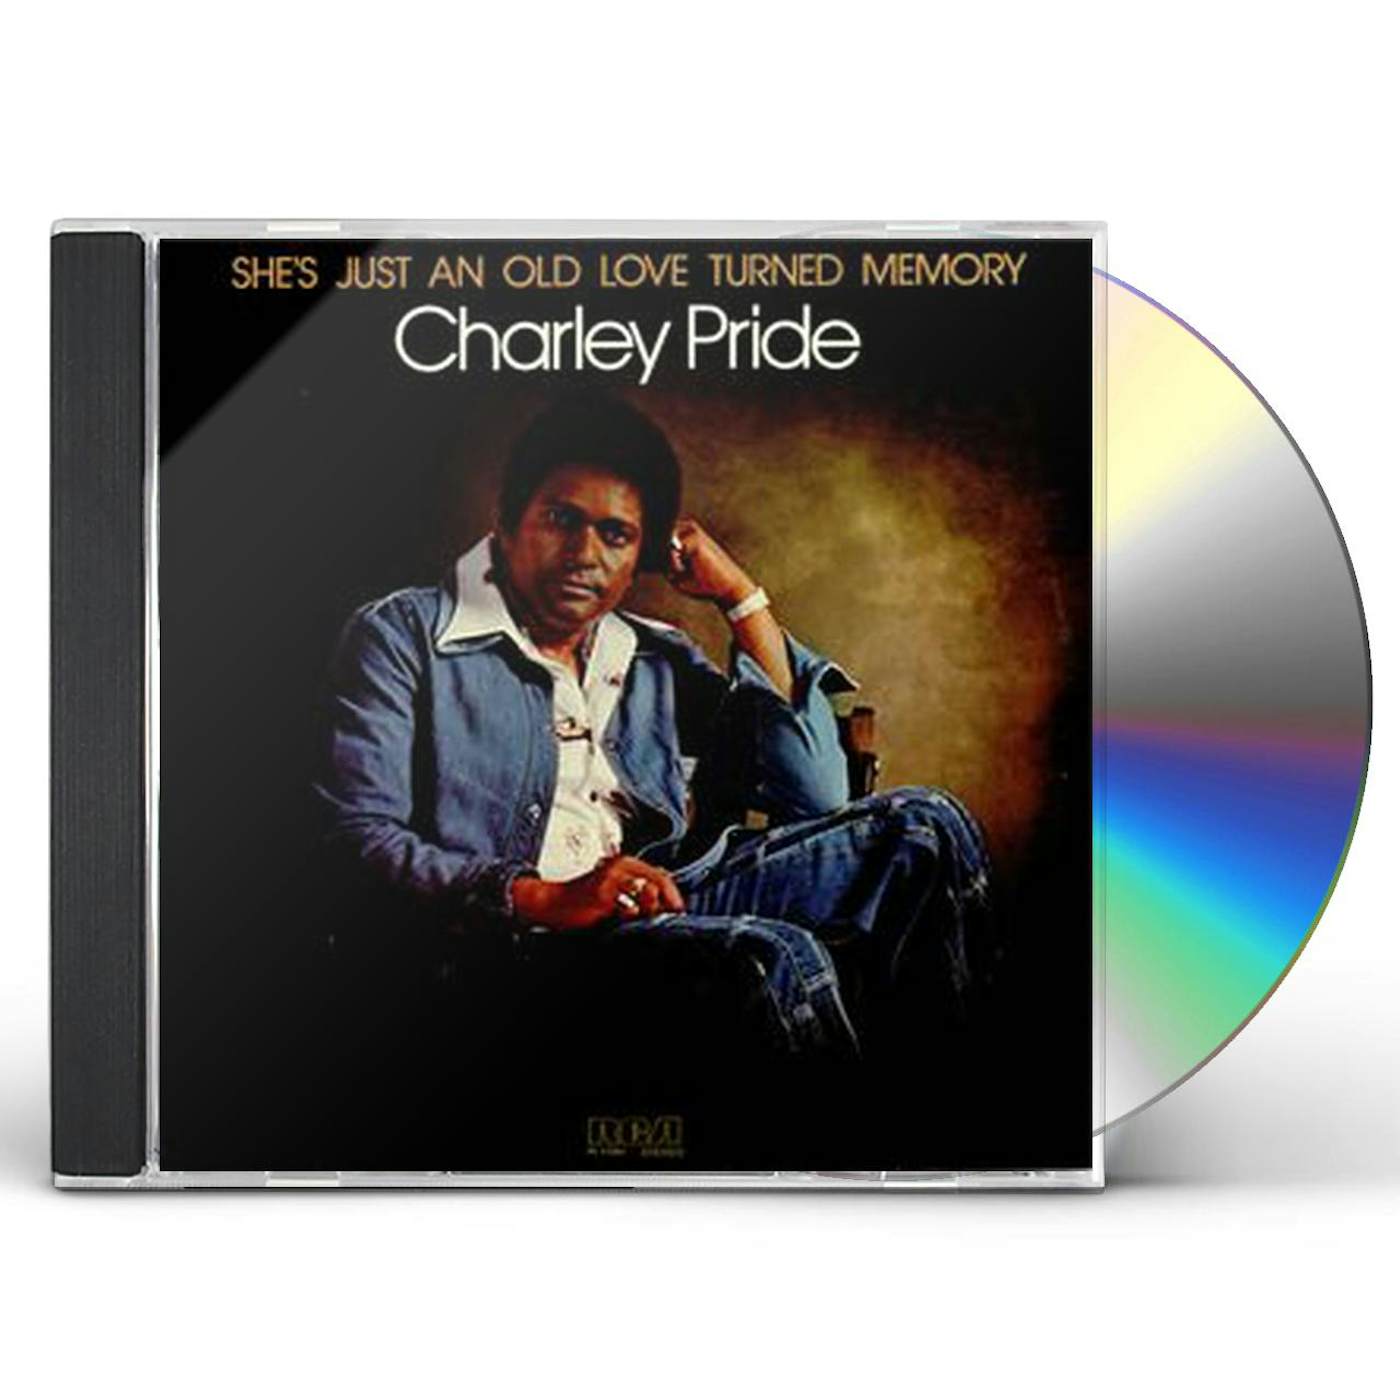 Charley Pride SHE'S JUST AN OLD LOVE TURNED MEMORY CD